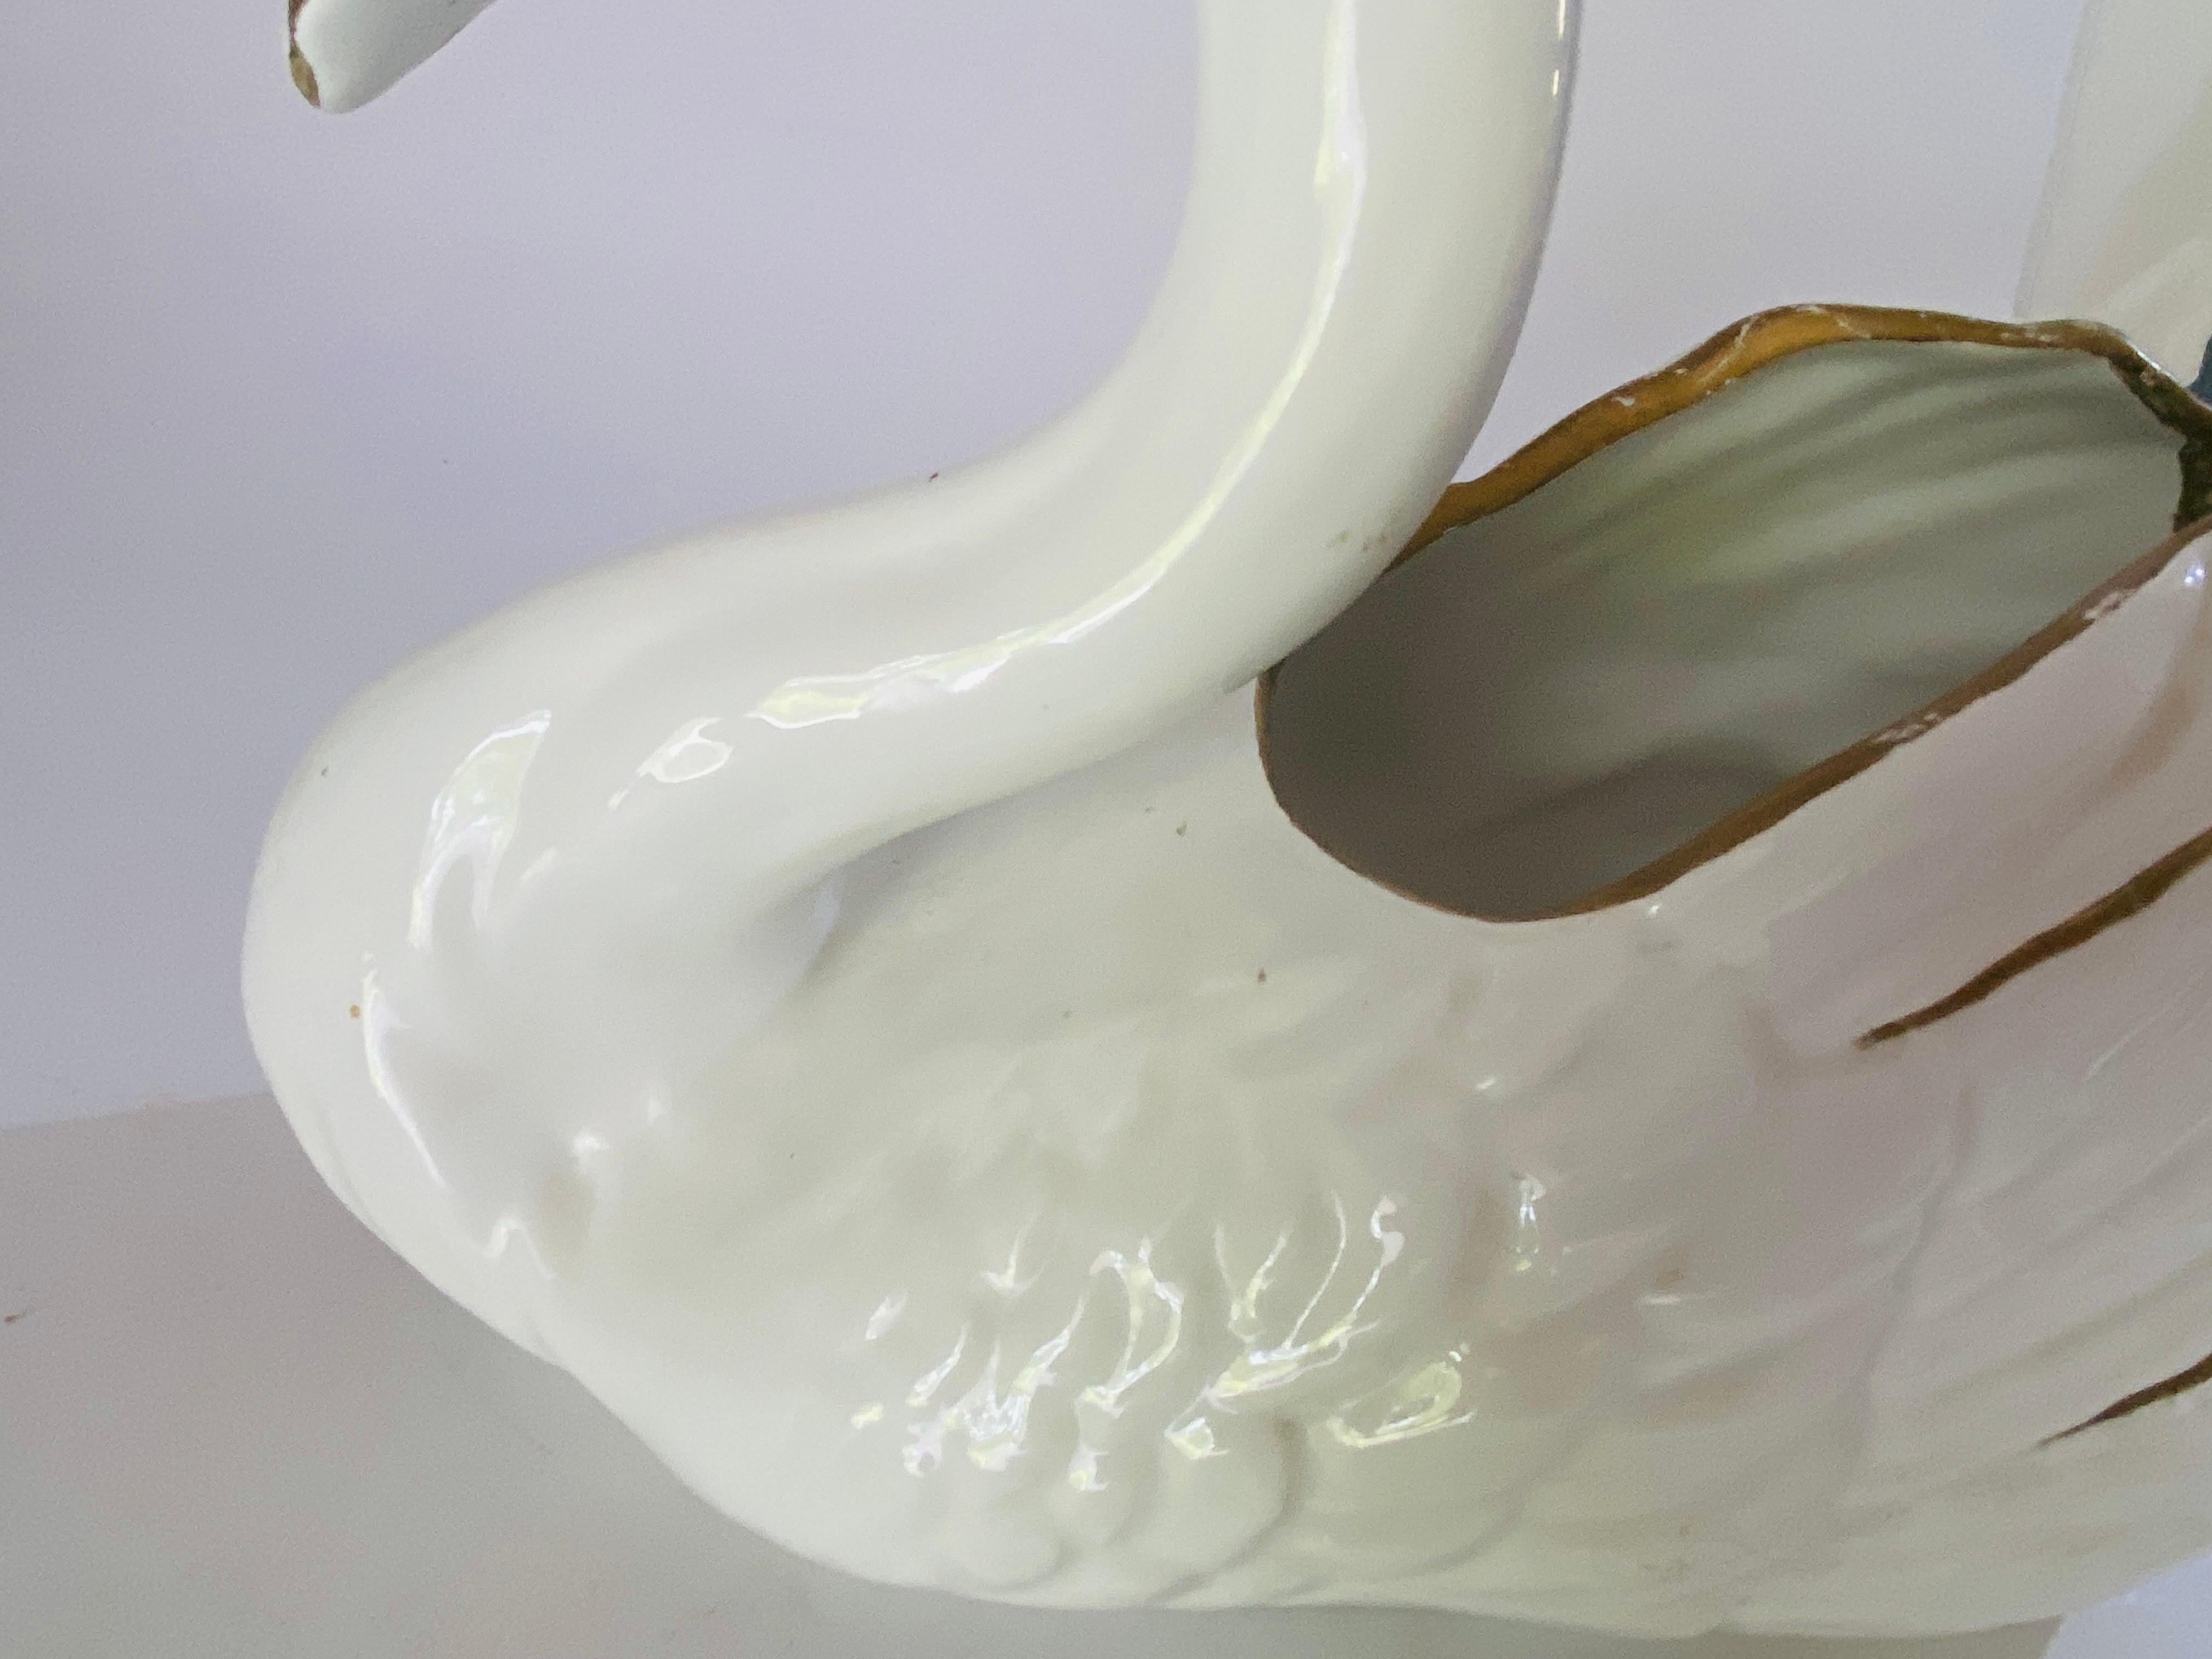 This is a vide poche in porcalain, or a decorative bascket, as also an swan sculpture from the 1970s.
It has been made in Italy.